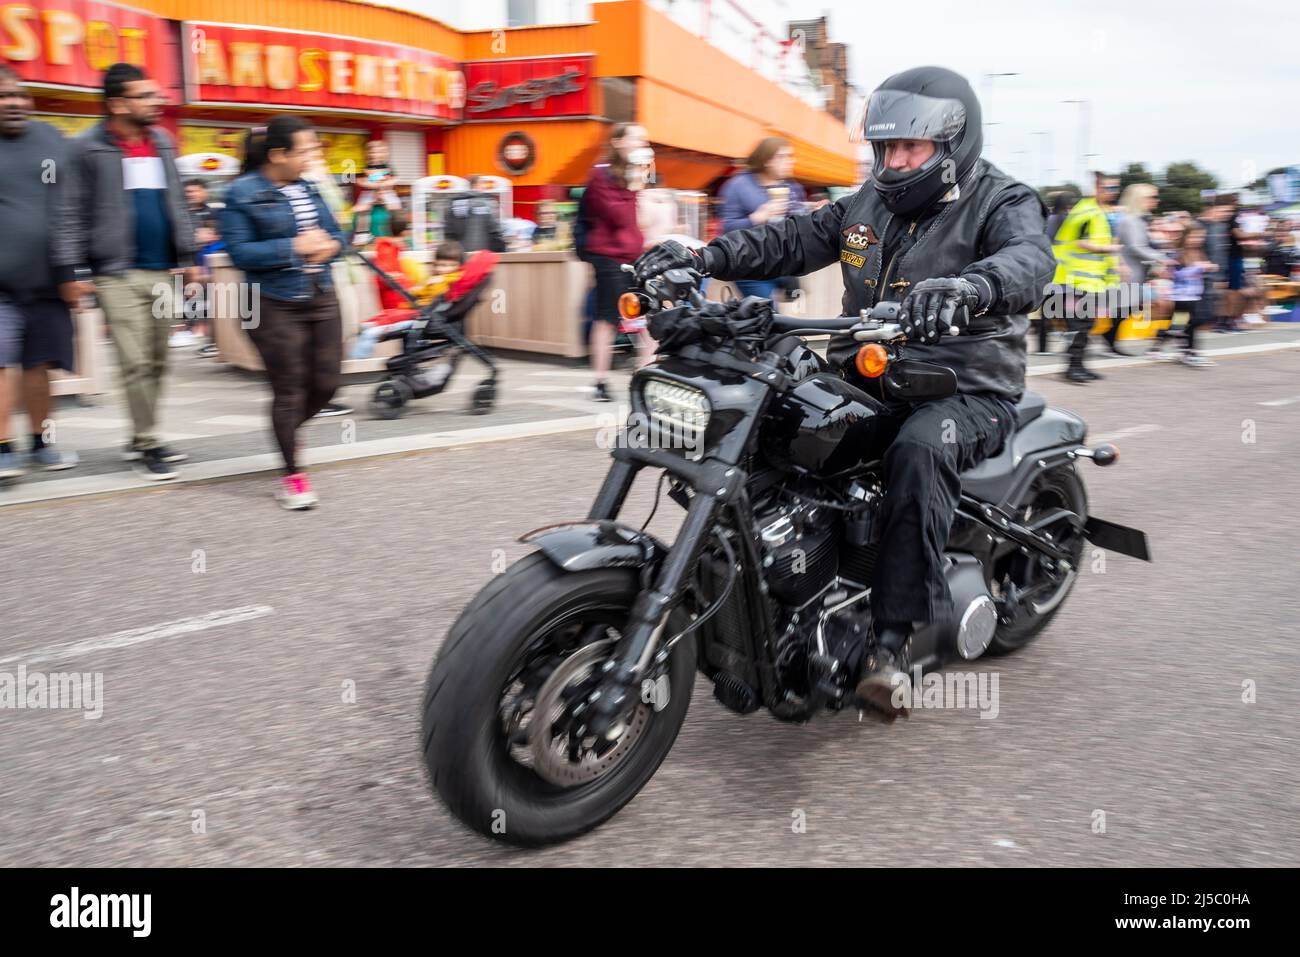 Harley Davidson motorcycle rider arriving for the Southend Shakedown 2022 motorcycle gathering in Southend on Sea, Essex, UK. Speed, motion Stock Photo